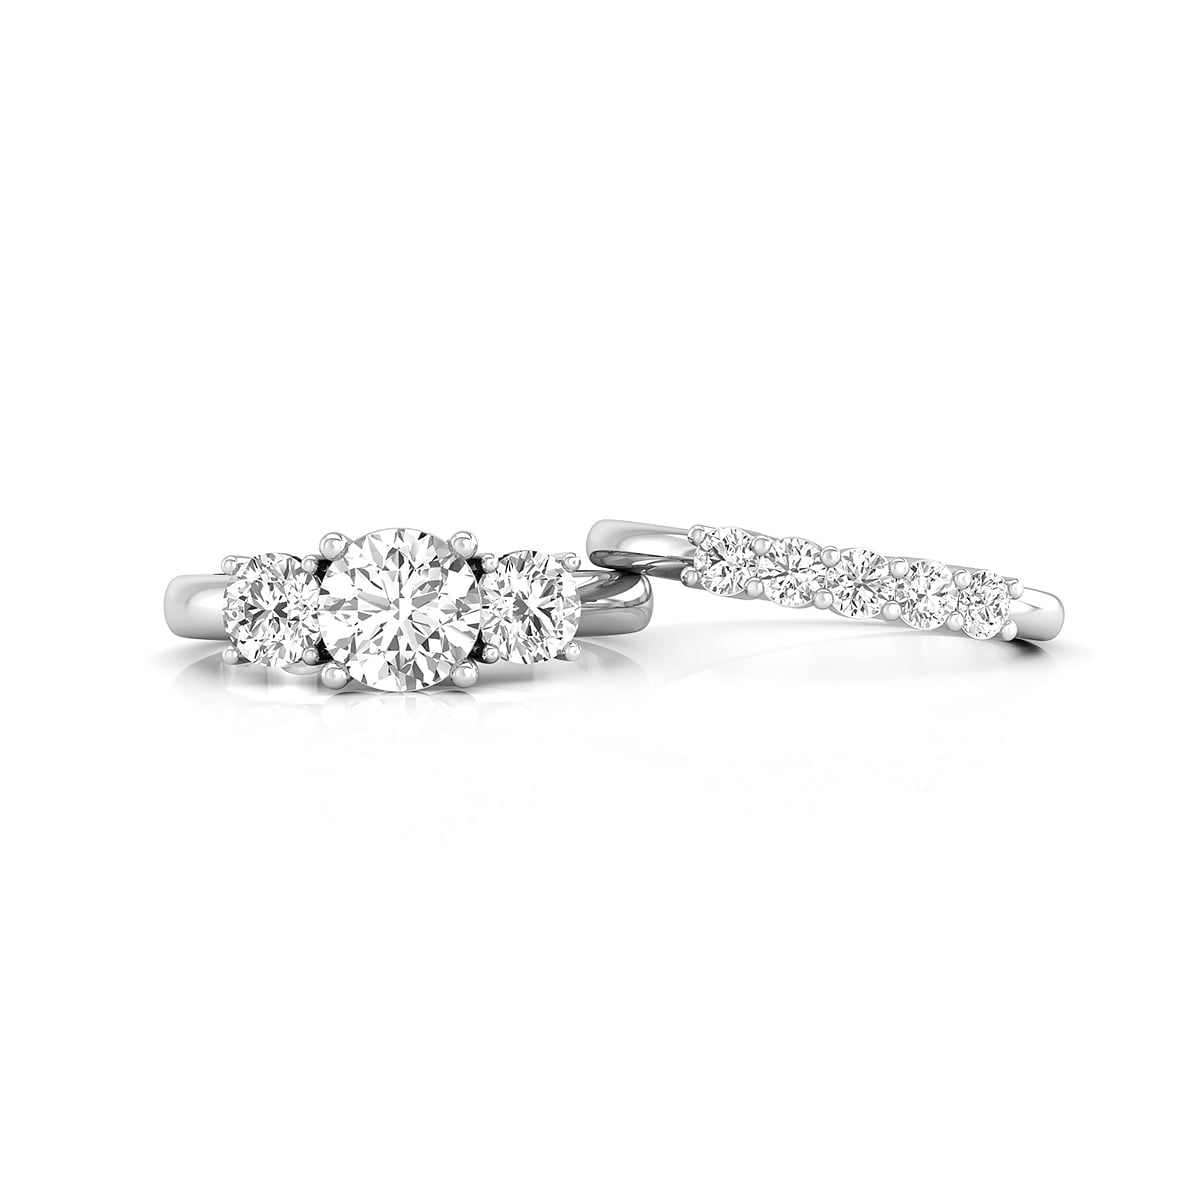 Round Cut Moissanite Three Stone With Stacking Band Ring Set For Women (2 6/7 TCW)